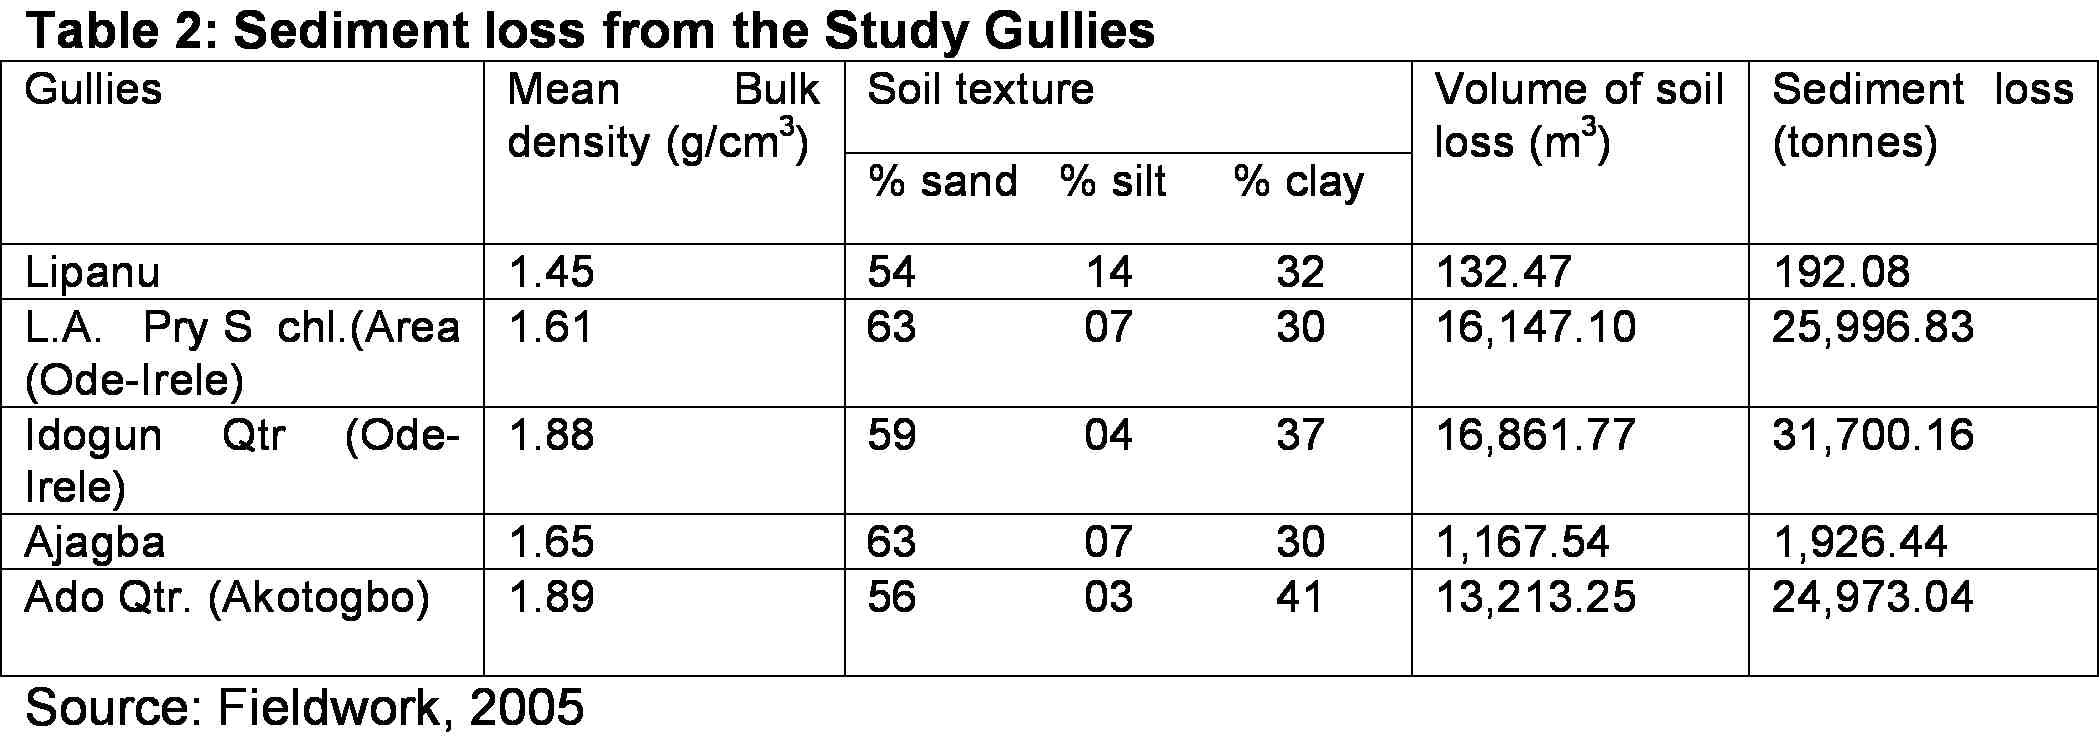 Table showing data on sediment from the study gullies